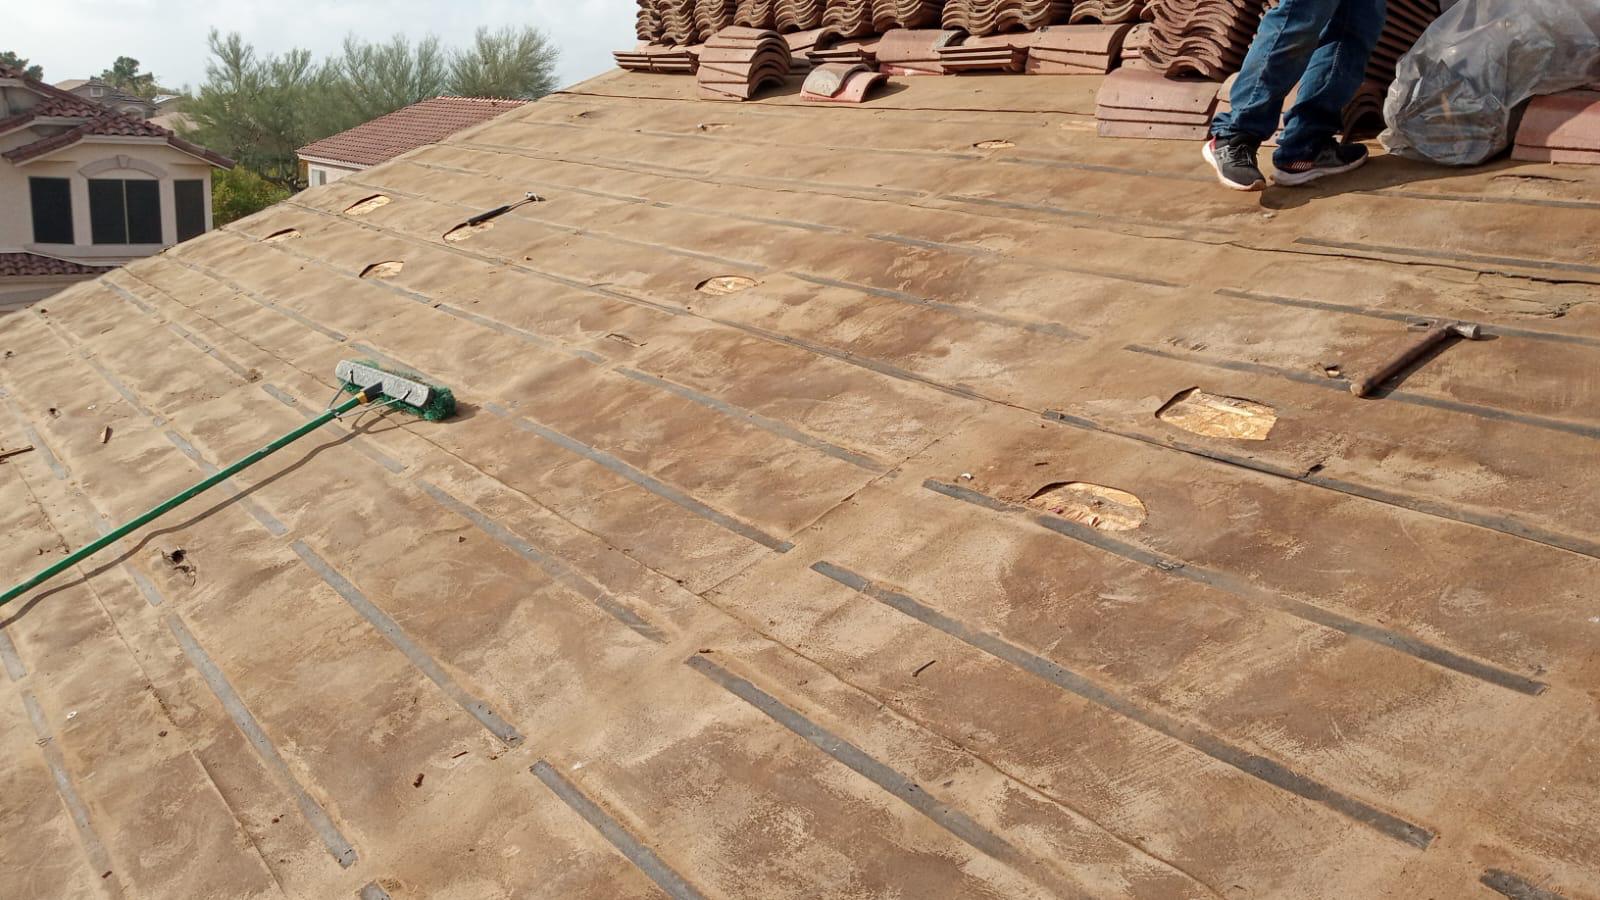 Starting the tile re-felt process, Behmer Roofing ensures a secure and elegant roof for this Whisper Rock home.